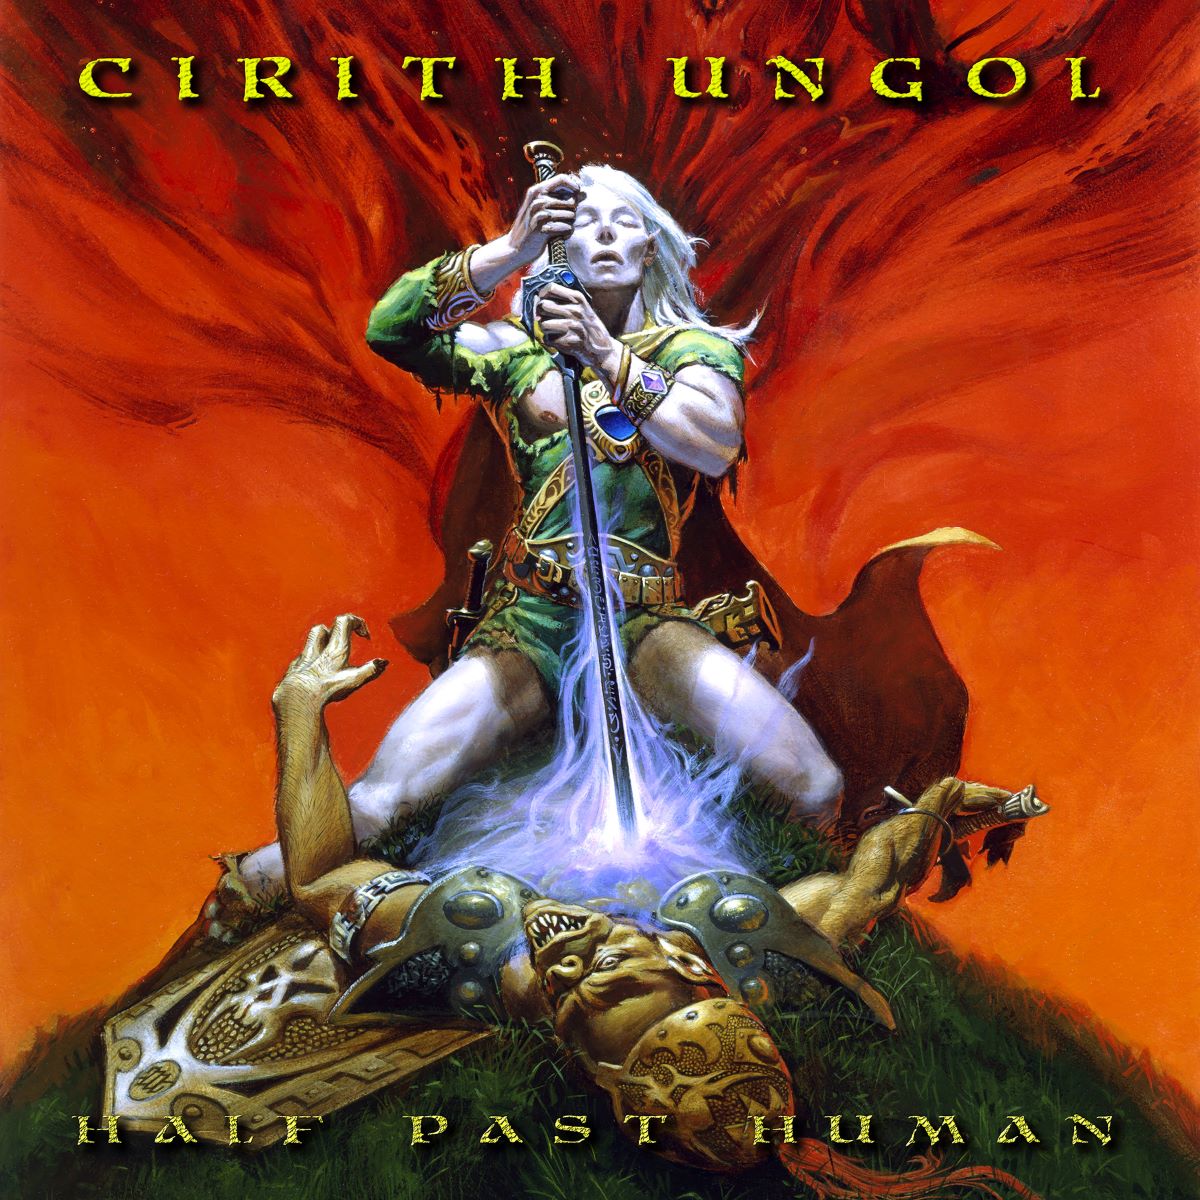 rt-we21011-cirith-ungol-unearths-some-long-forgotten-gems-for-half-past-human-https-t-co-pvpqcpk7a1-cirithu-metalblade-m RT @we21011: Cirith Ungol unearths some long forgotten gems for Half Past Human, https://t.co/PVpqcPk7a1 @CirithU @MetalBlade @m... Twitter  